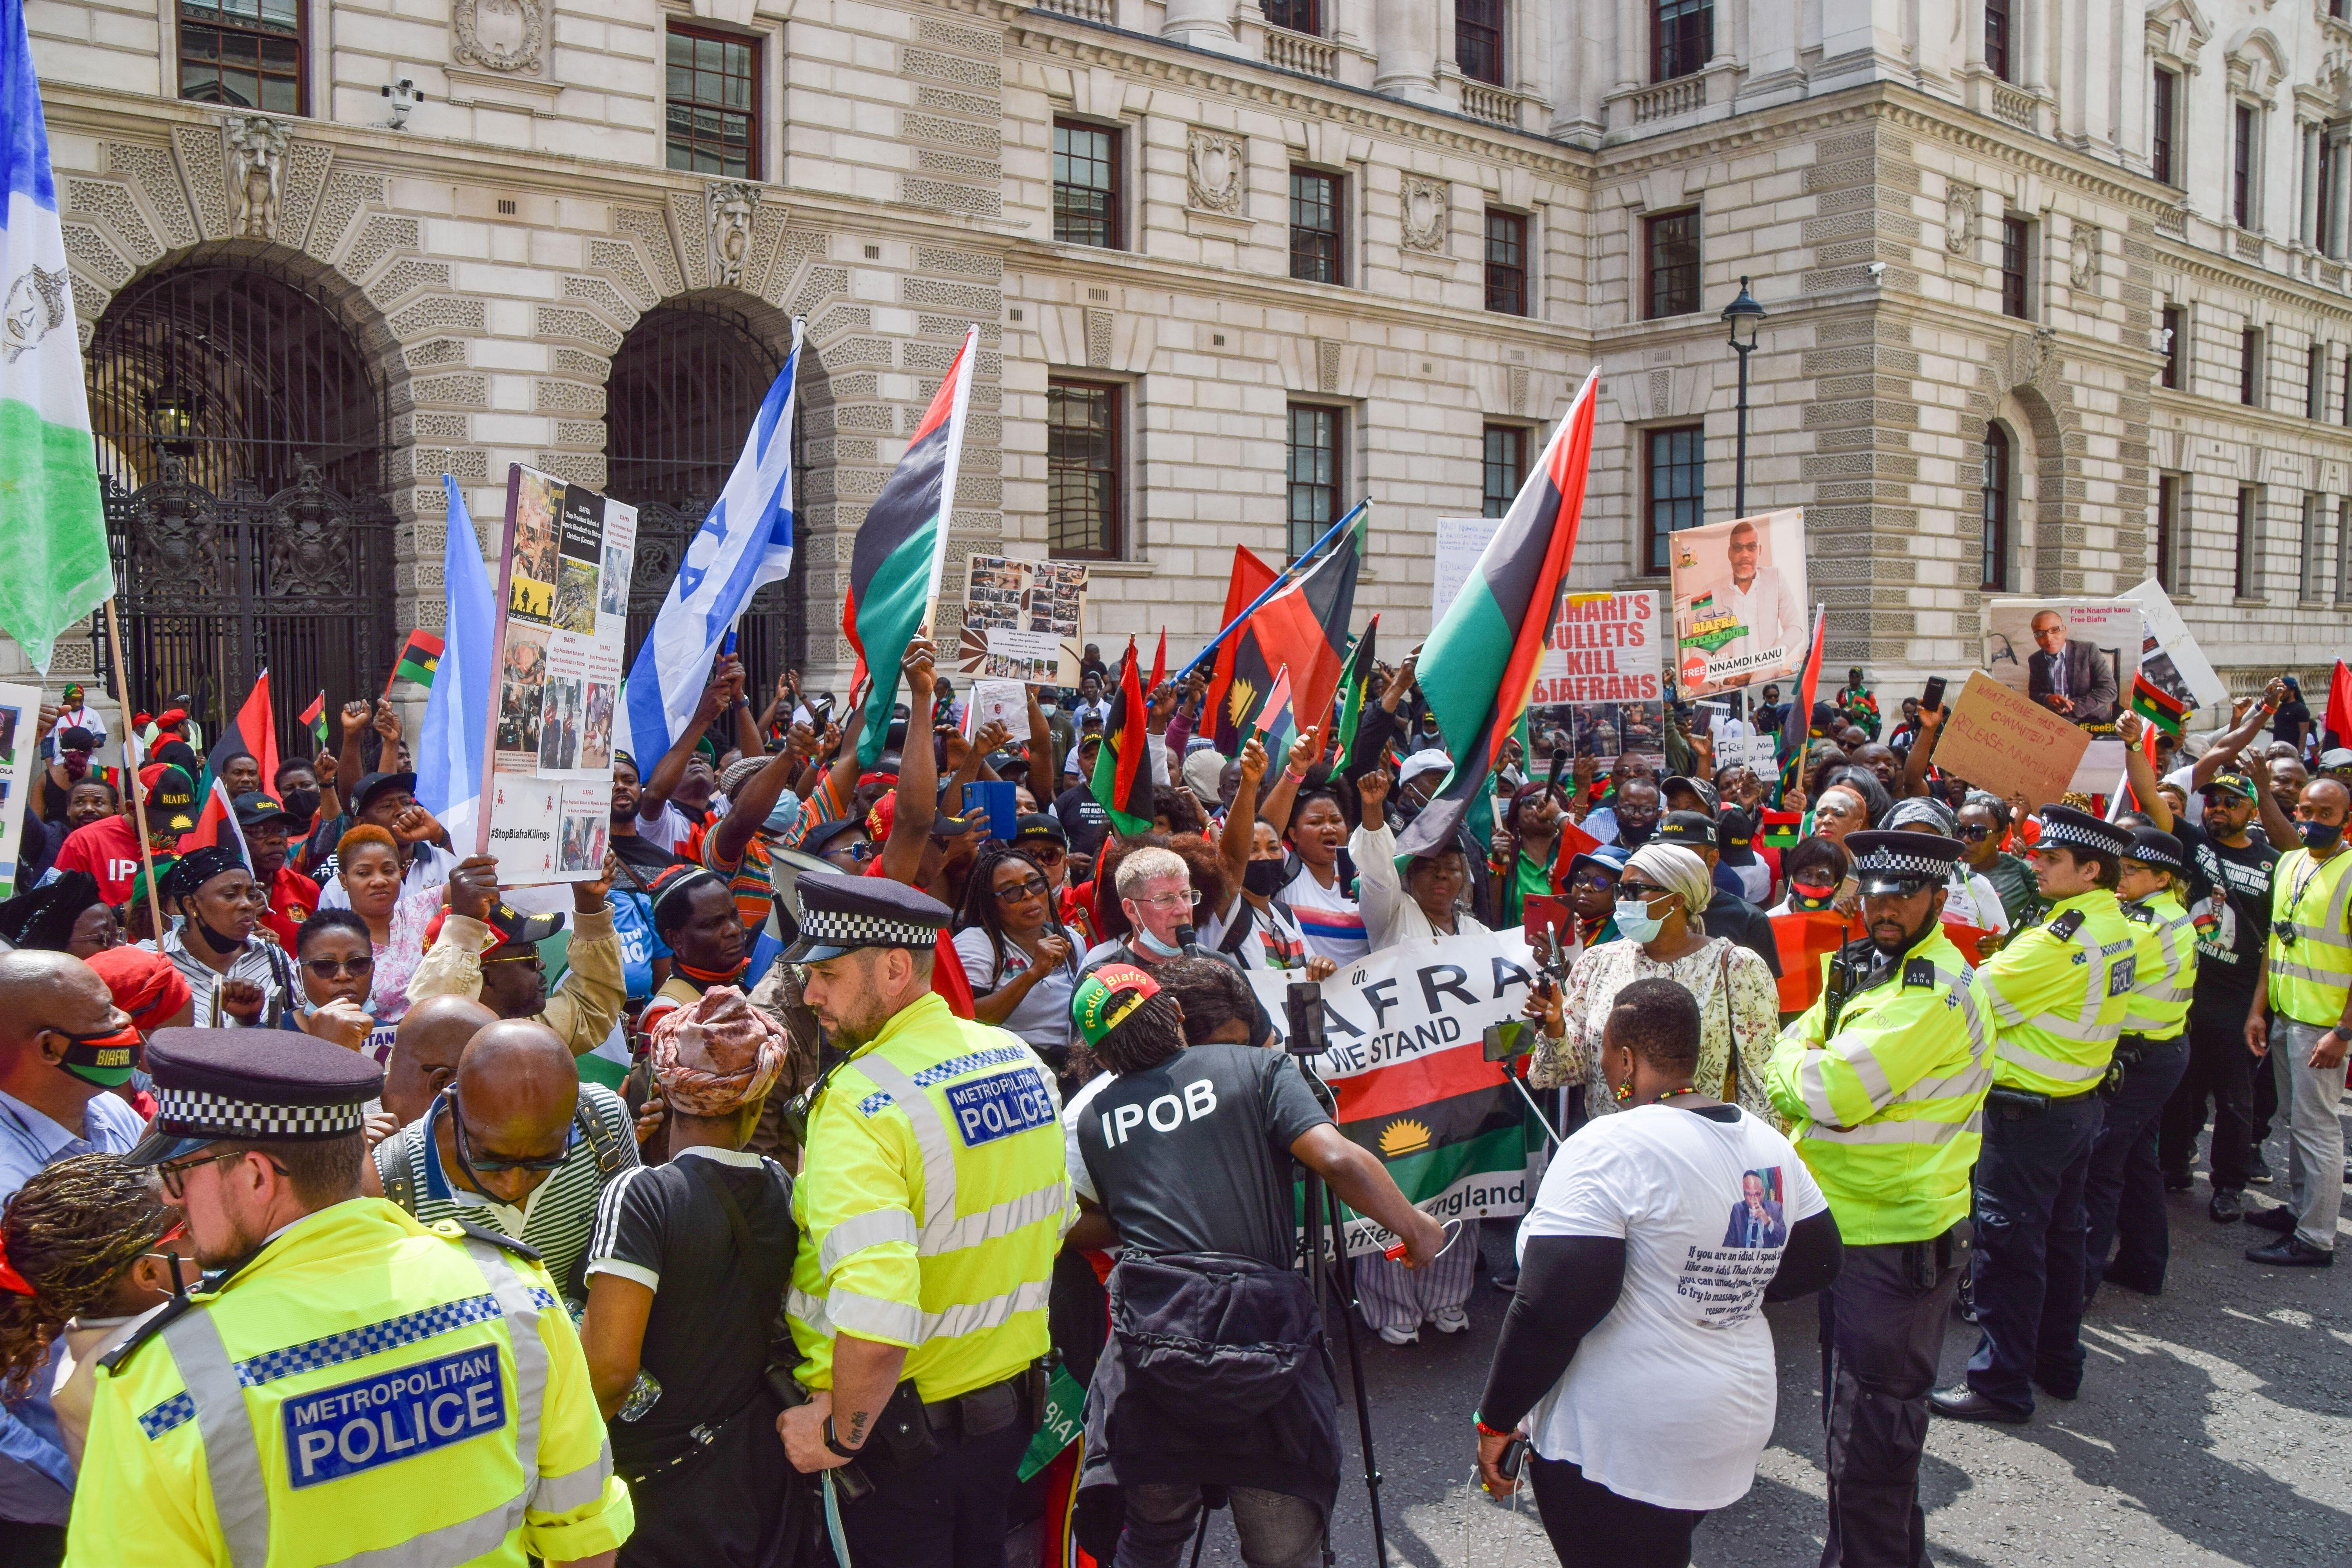 Free Biafra demonstrators gather in Whitehall demanding the release of Kanu and Sunday Adeyemo